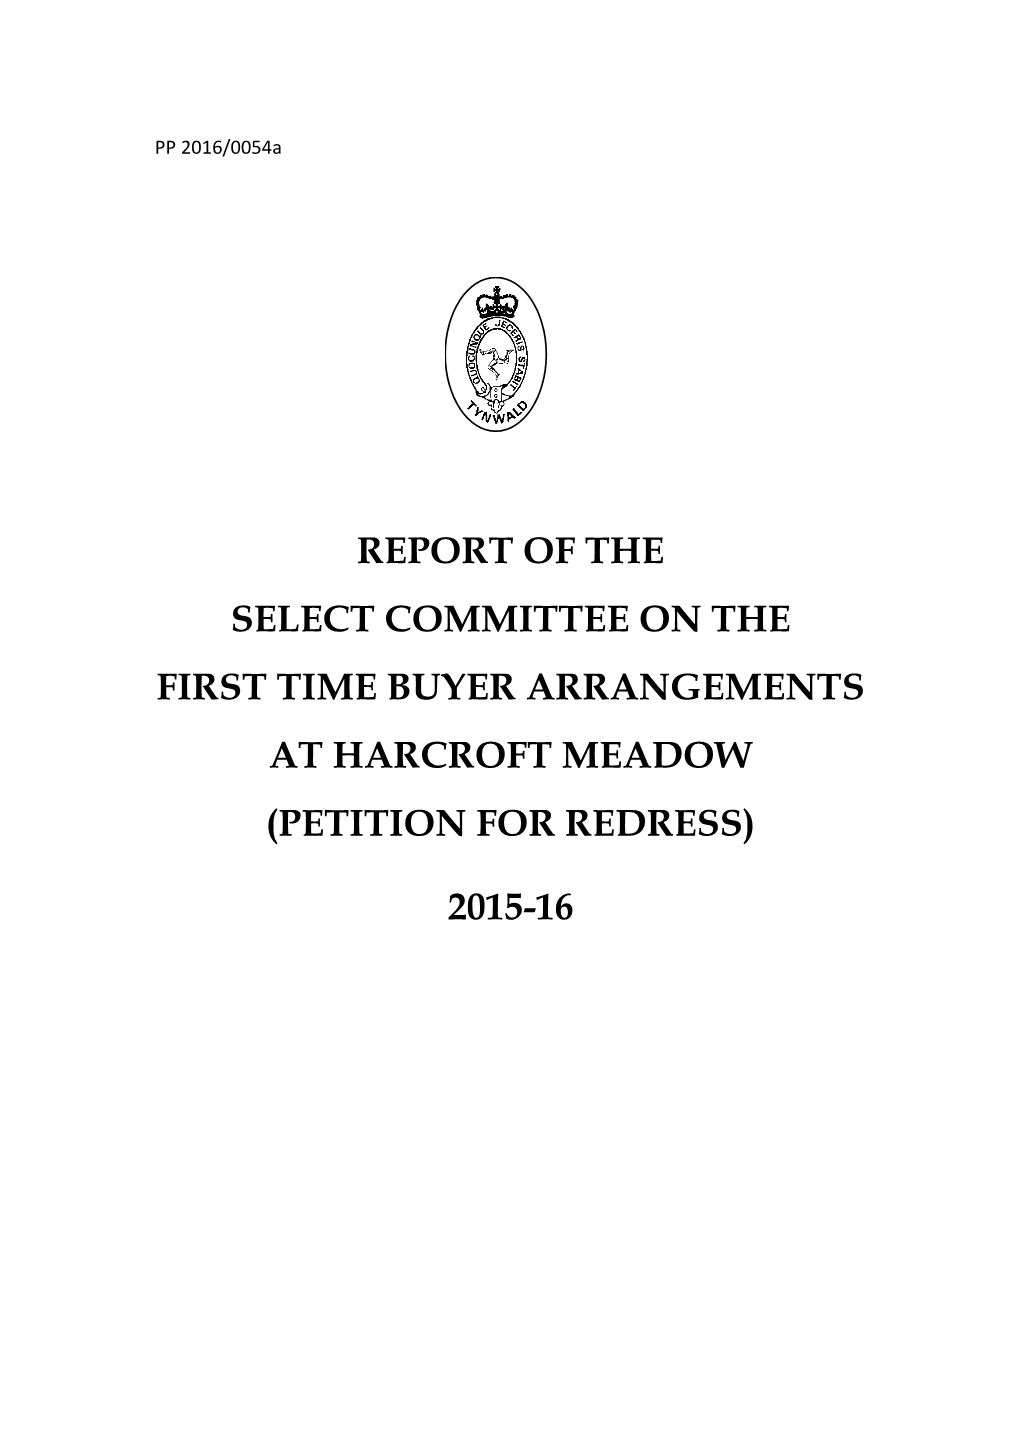 Report of the Select Committee on the First Time Buyer Arrangements at Harcroft Meadow (Petition for Redress)